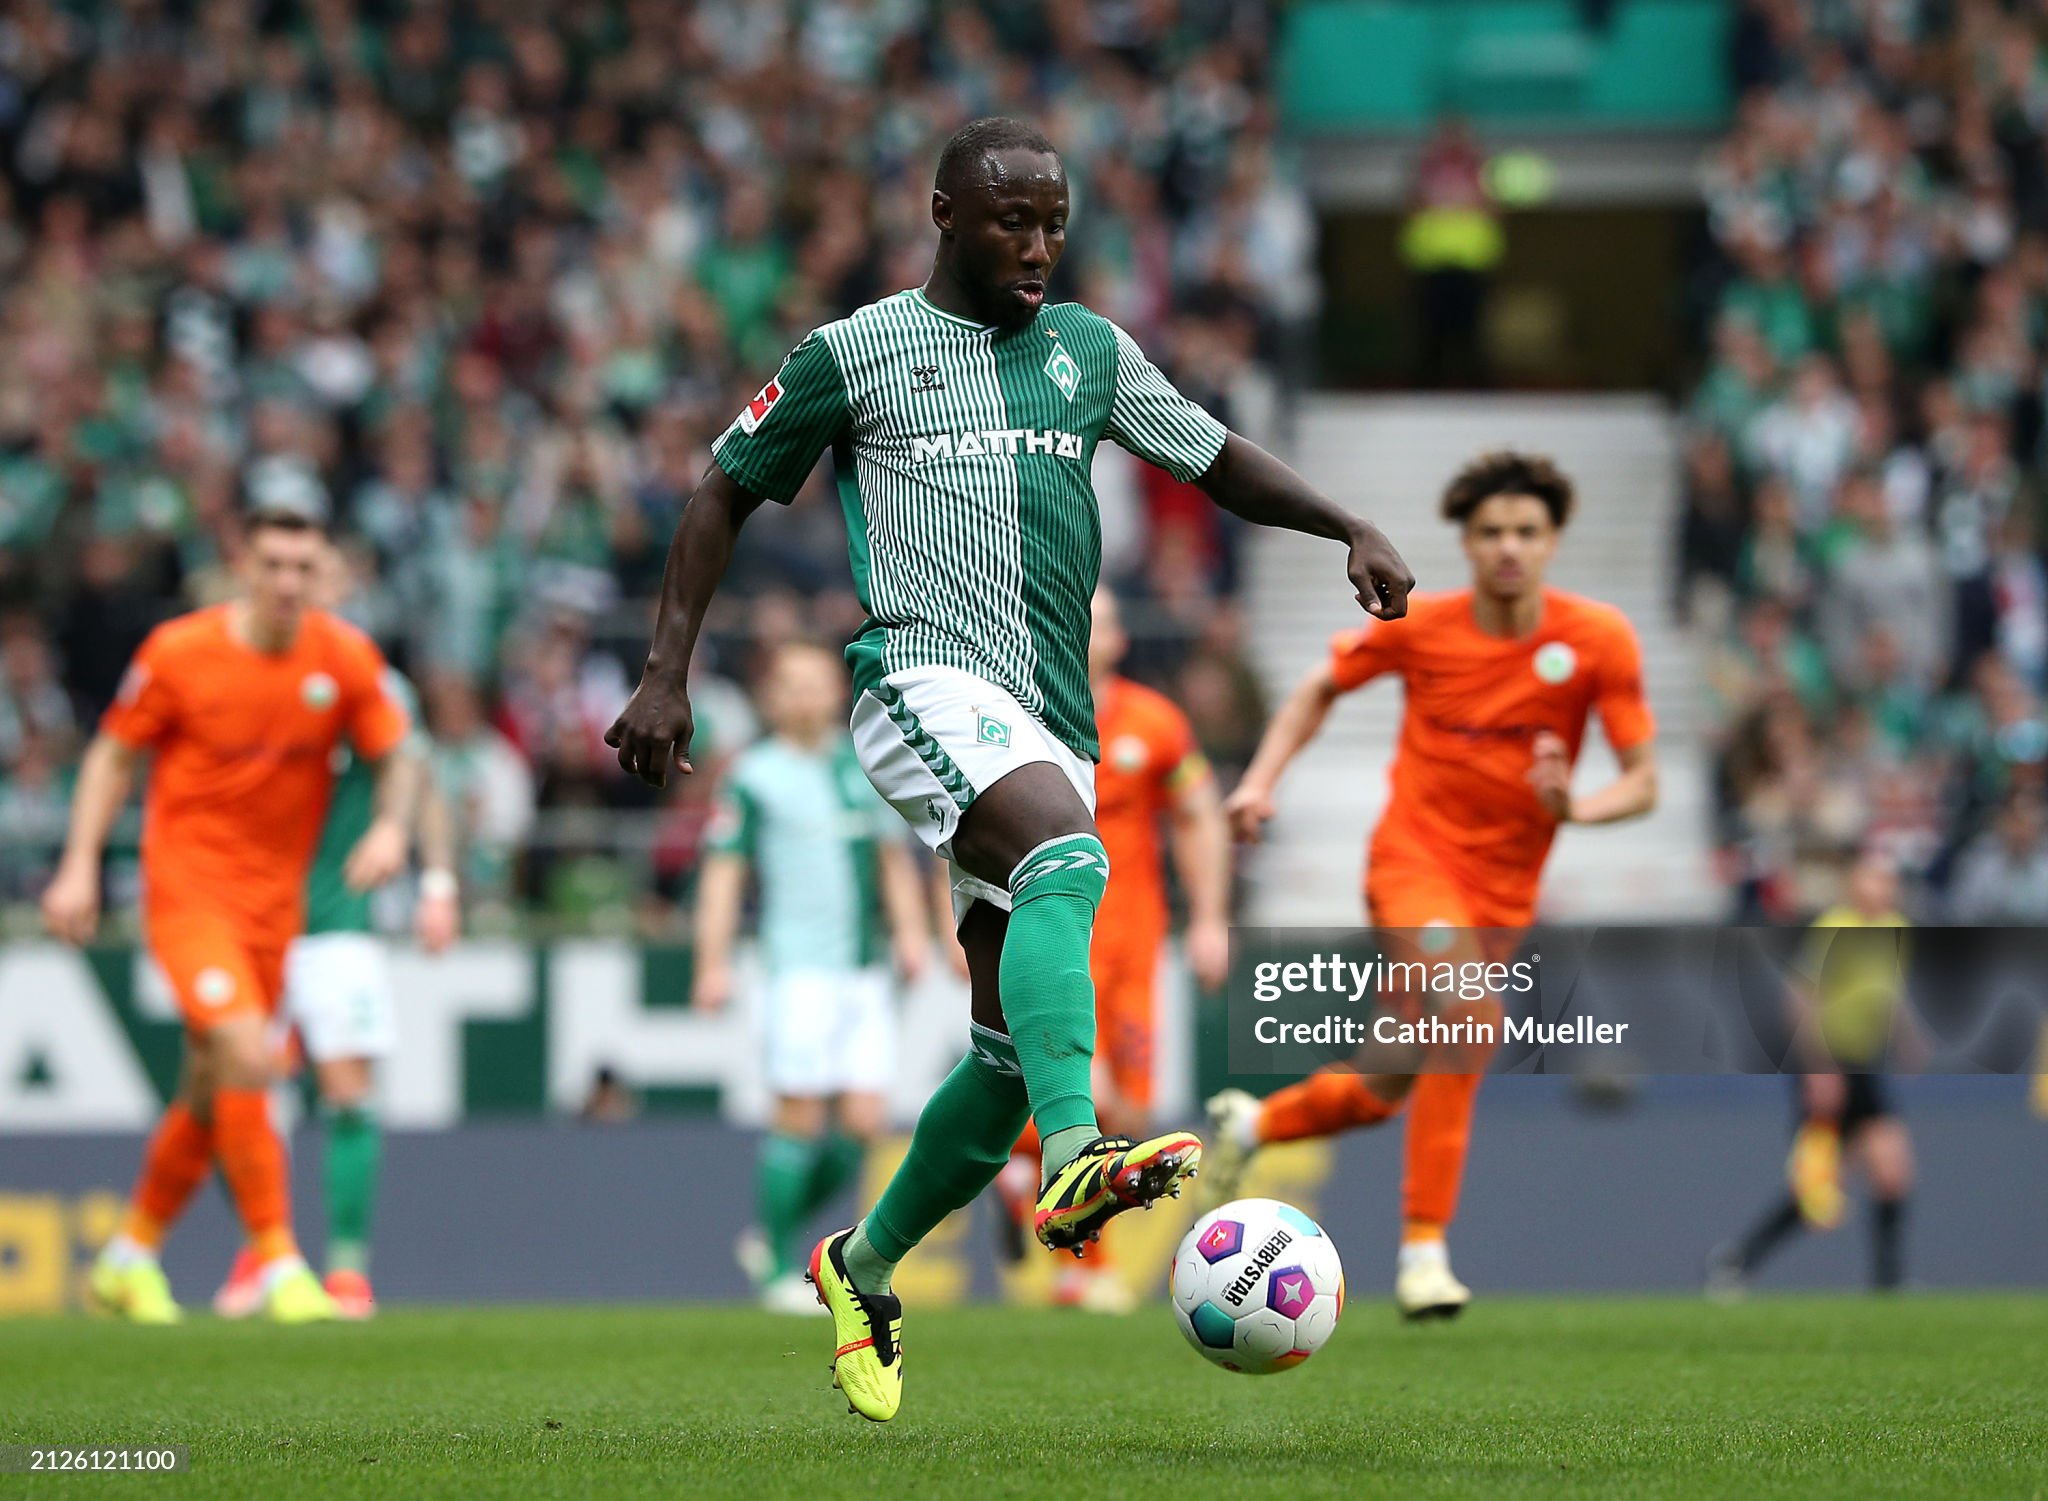 Werder Bremen removes Keïta from the squad after 'unacceptable' action